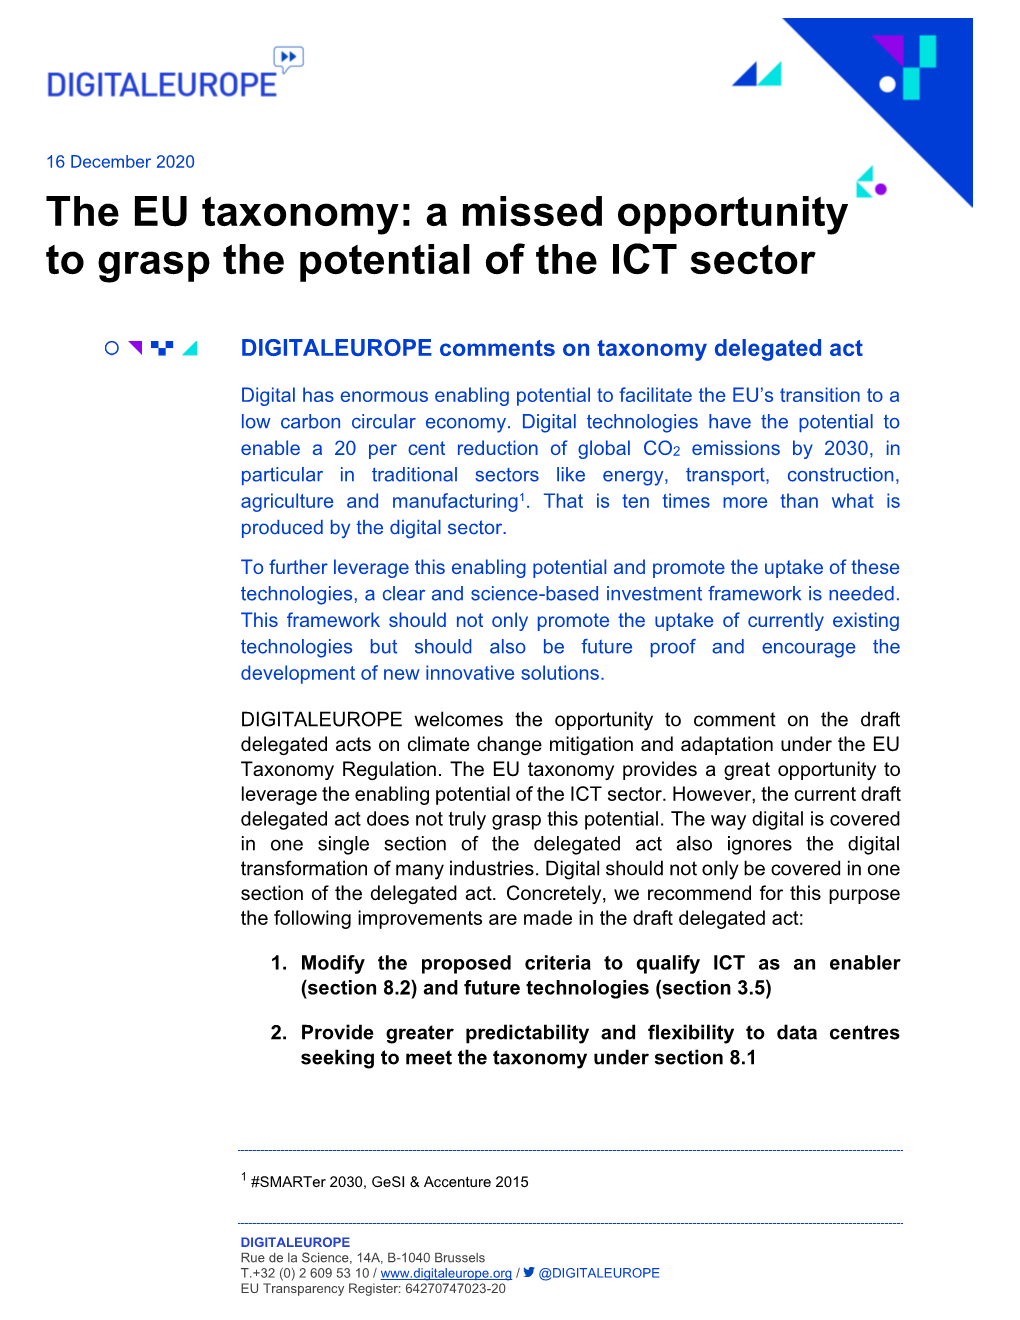 The EU Taxonomy: a Missed Opportunity to Grasp the Potential of the ICT Sector